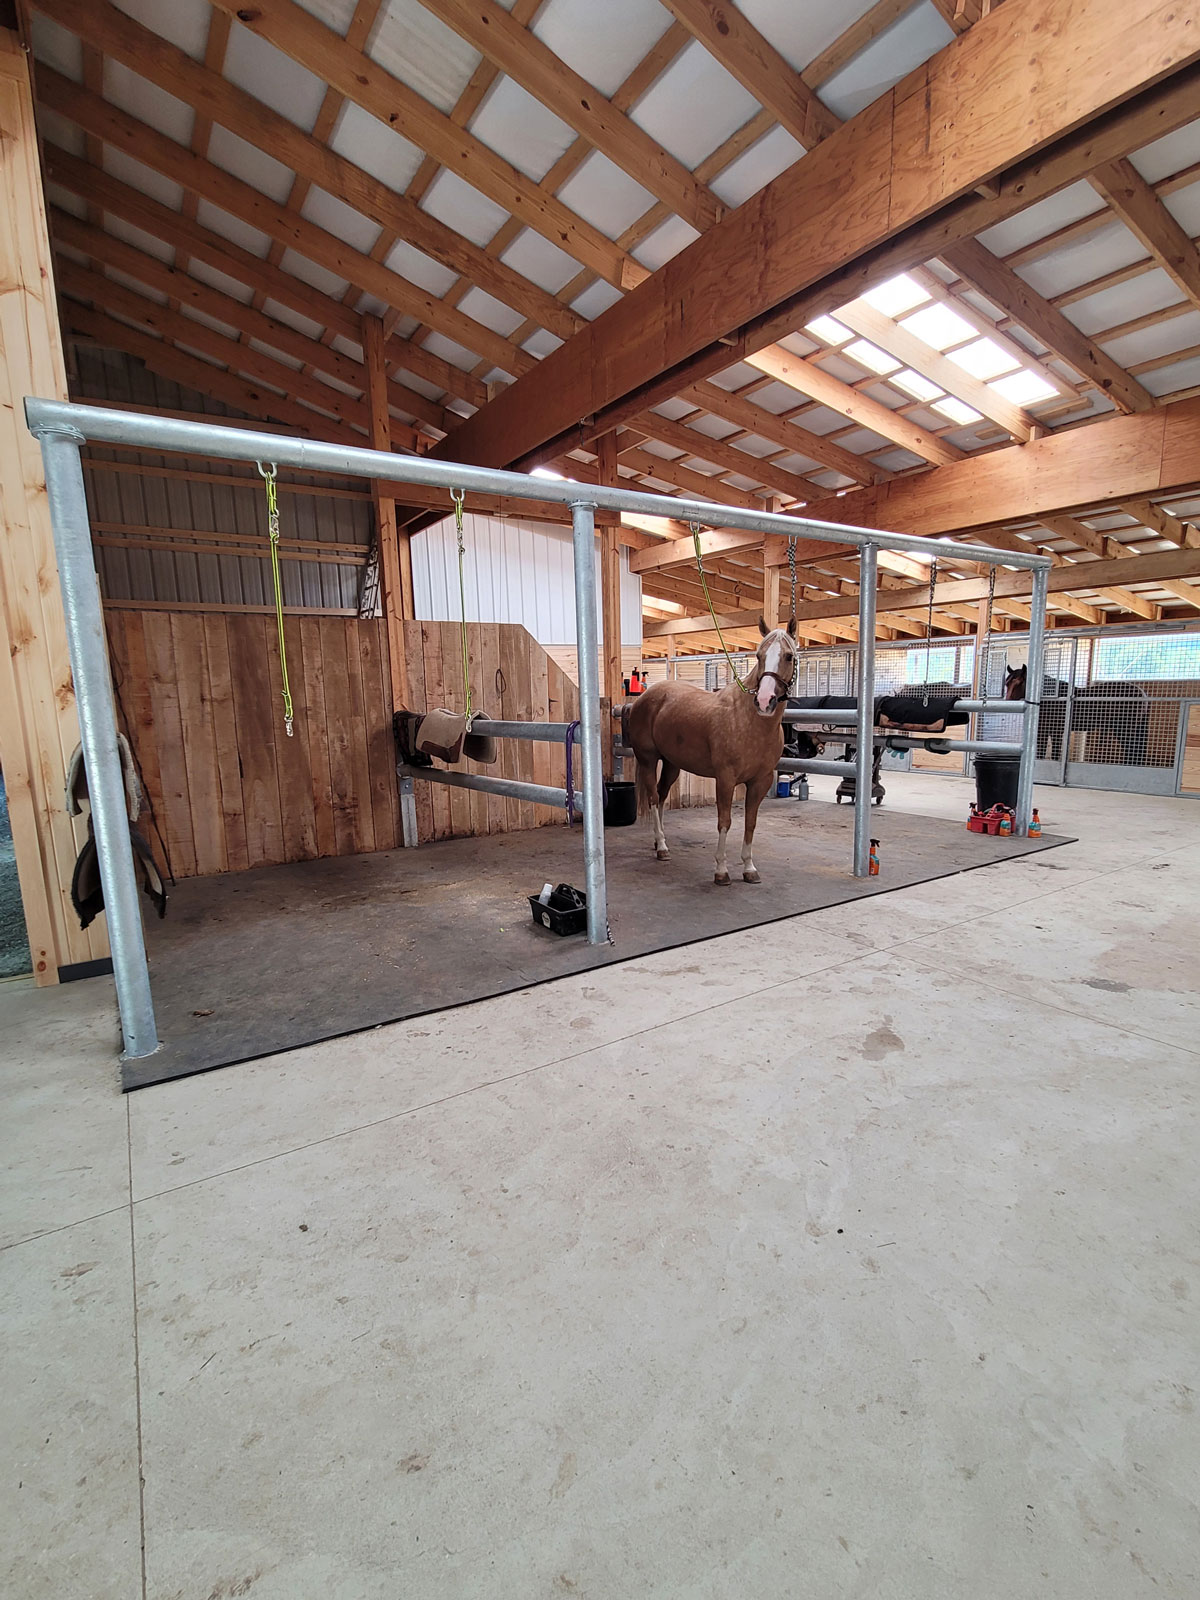 Horse tethered to a custom metal rail in a large stable